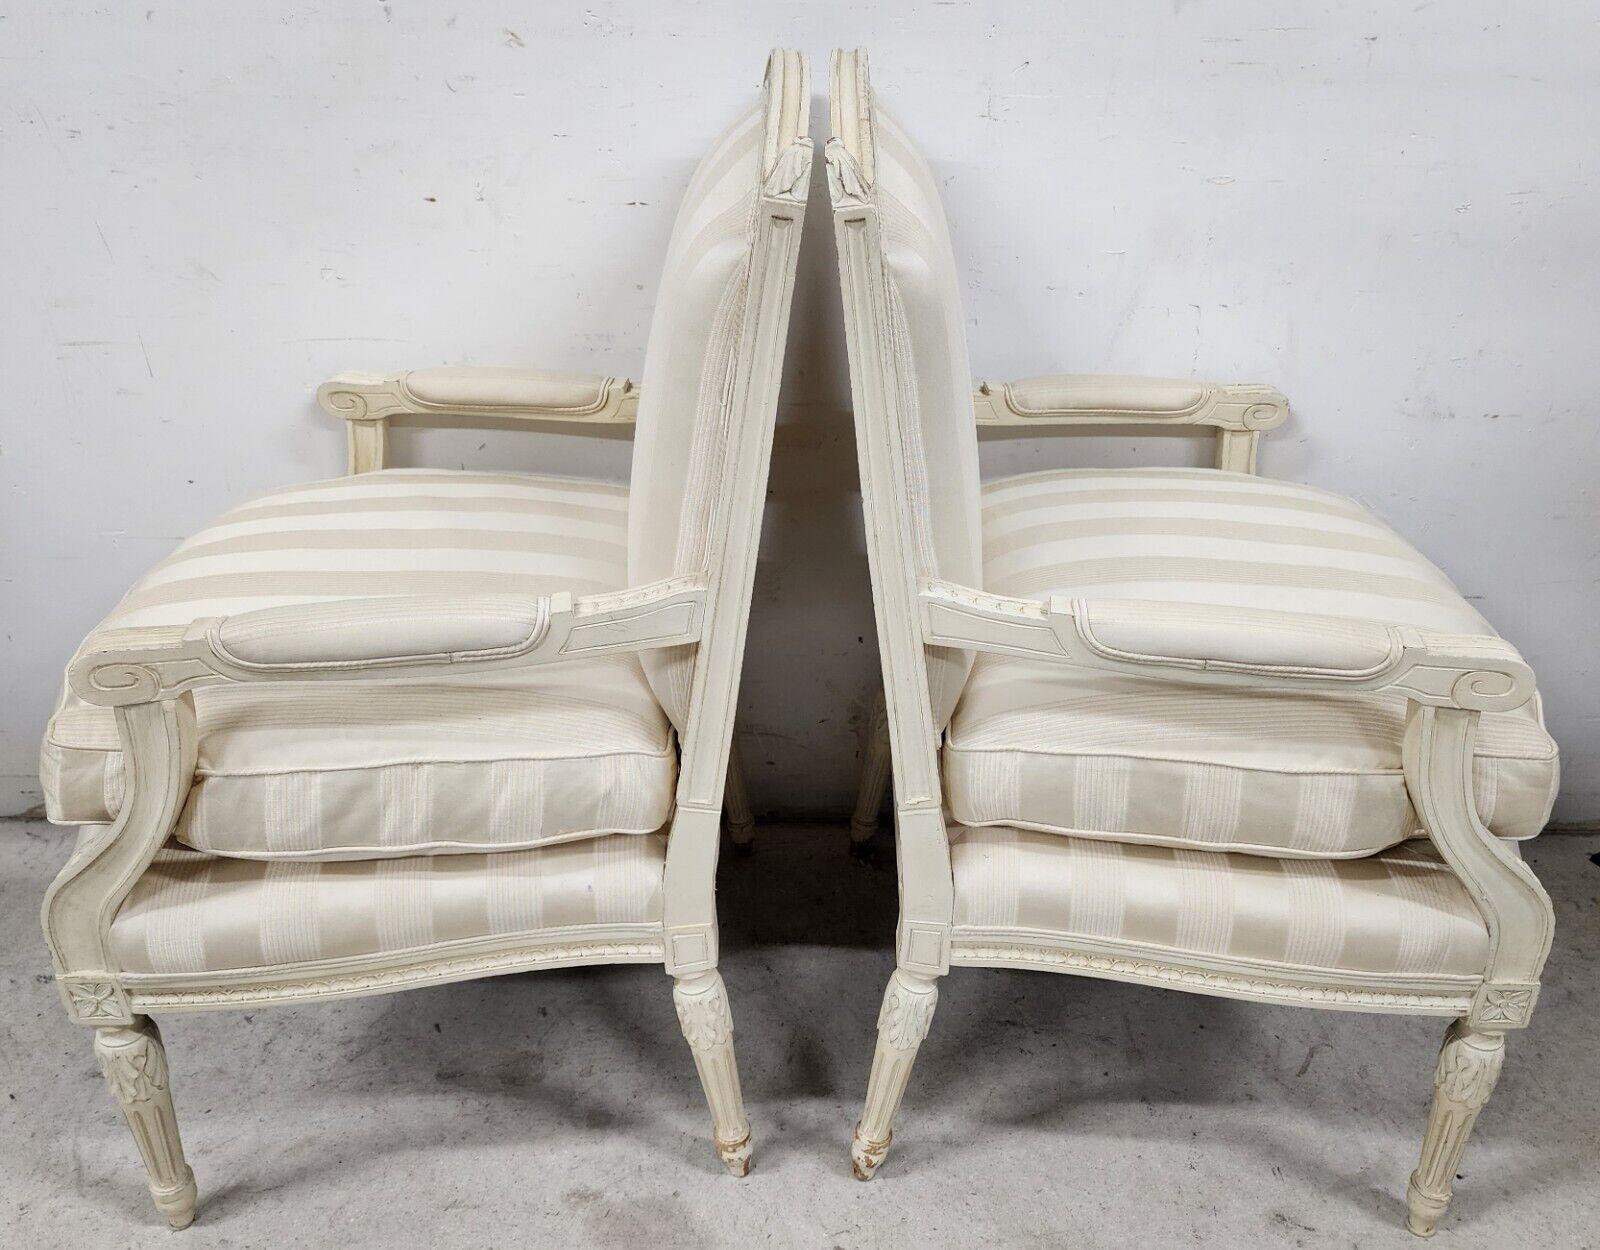 French Provincial Vintage French Armchairs Shabby Chic